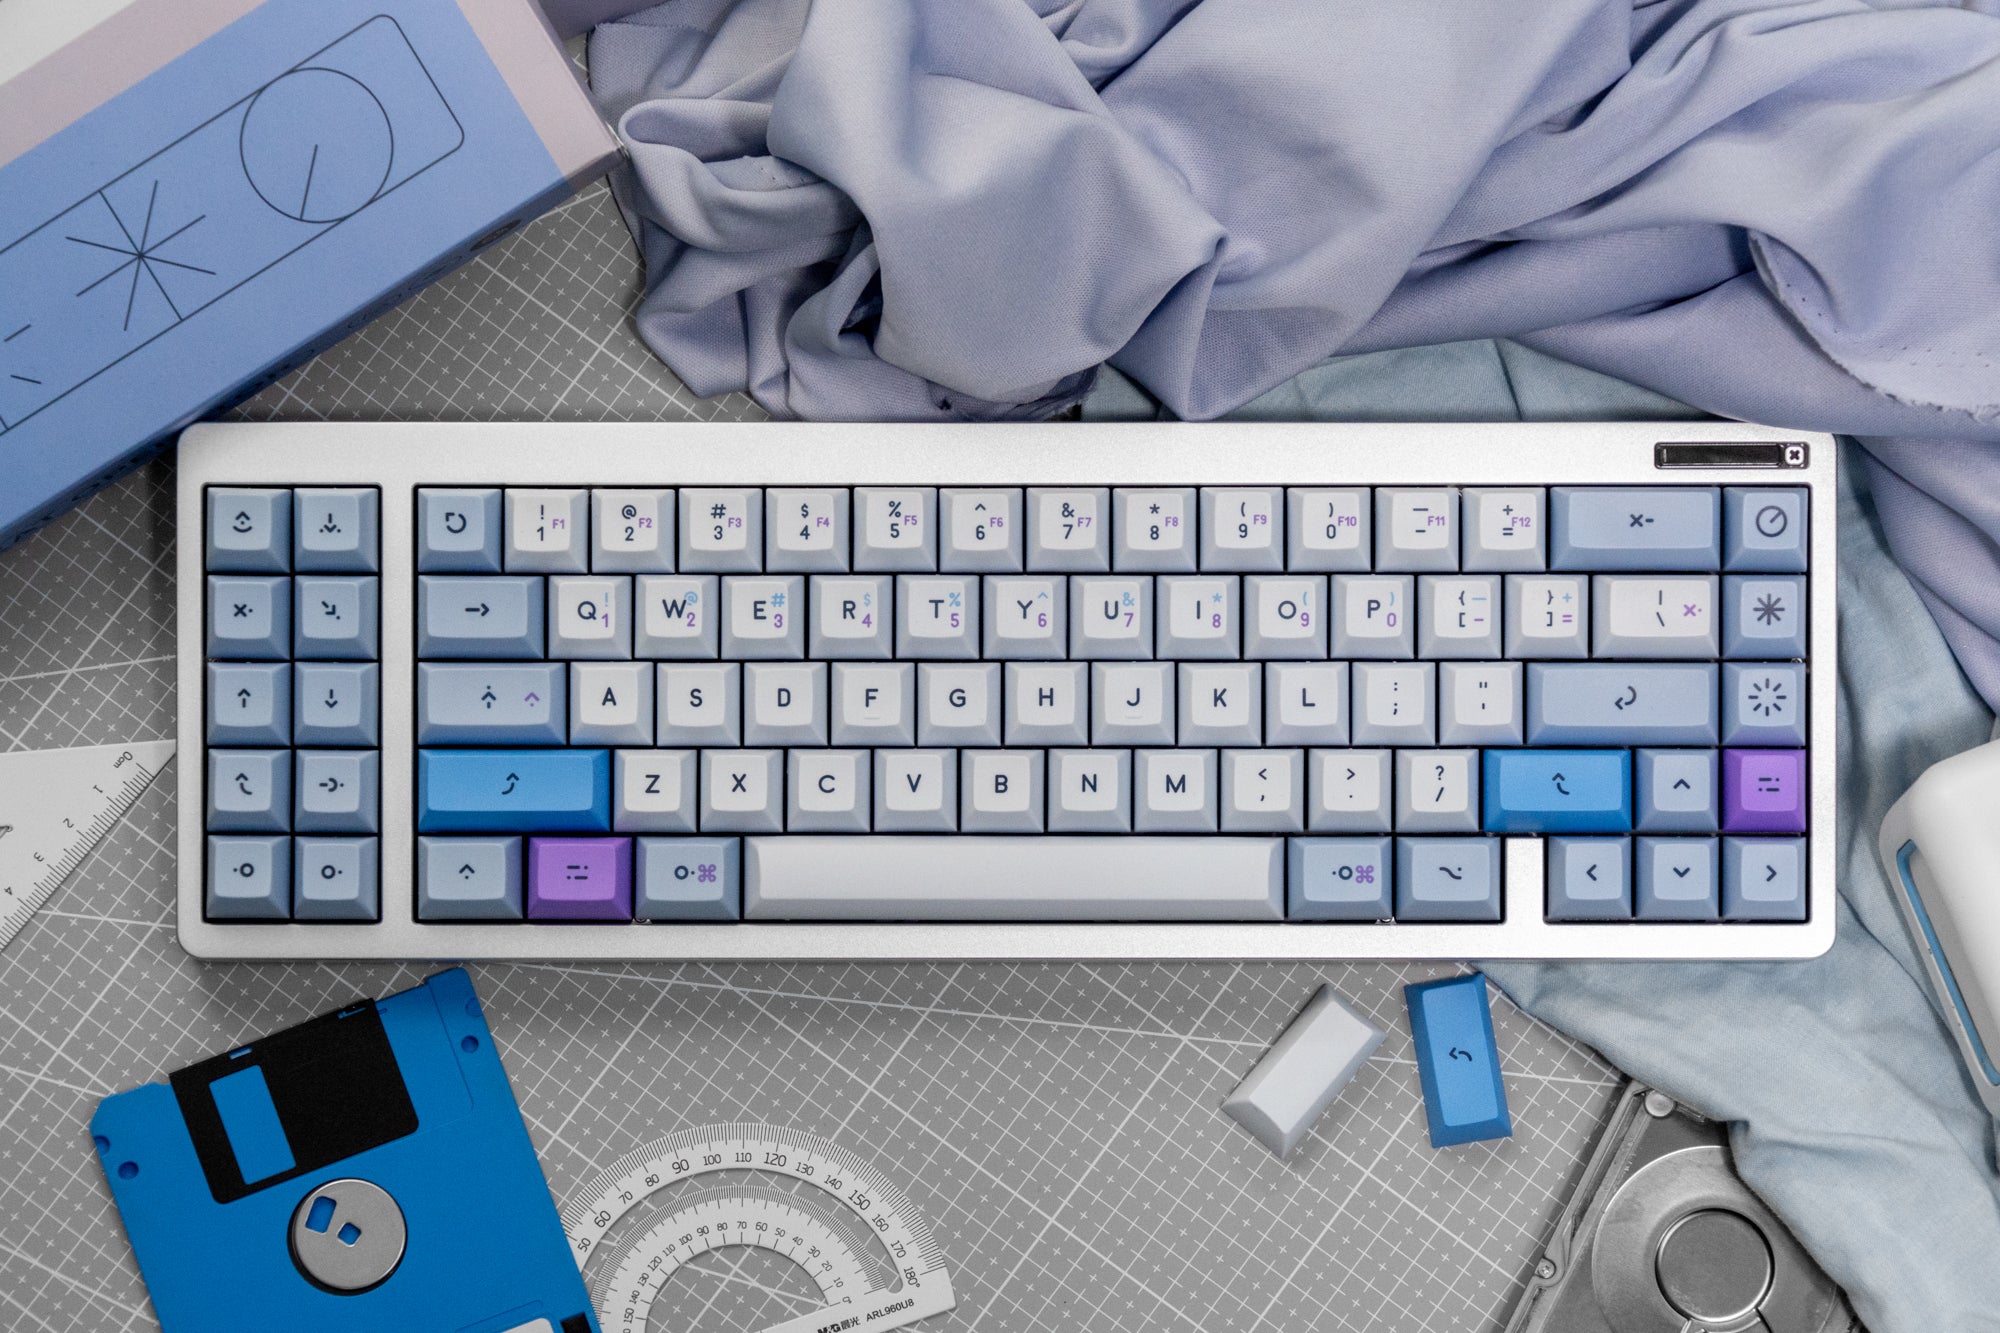 KAT Operator Thickened Double Shot PBT Keycaps Designed by Biip